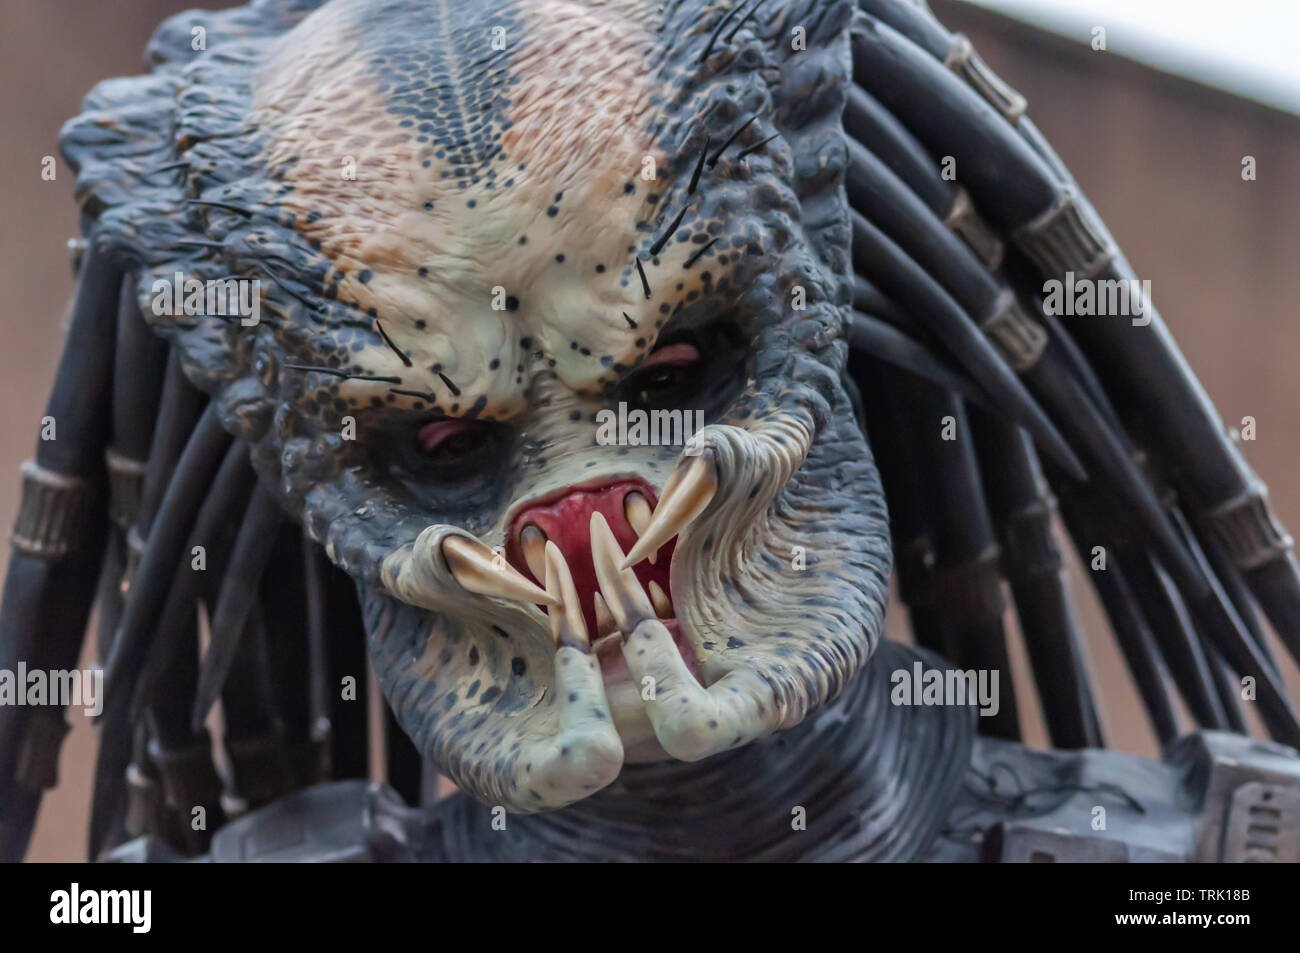 Glasgow , Scotland, UK. 7th June, 2019. The character Predator from the science fiction action horror film of the same name at the annual Govan Fair which  this year celebrates its 263rd anniversary. Credit: Skully/Alamy Live News Stock Photo